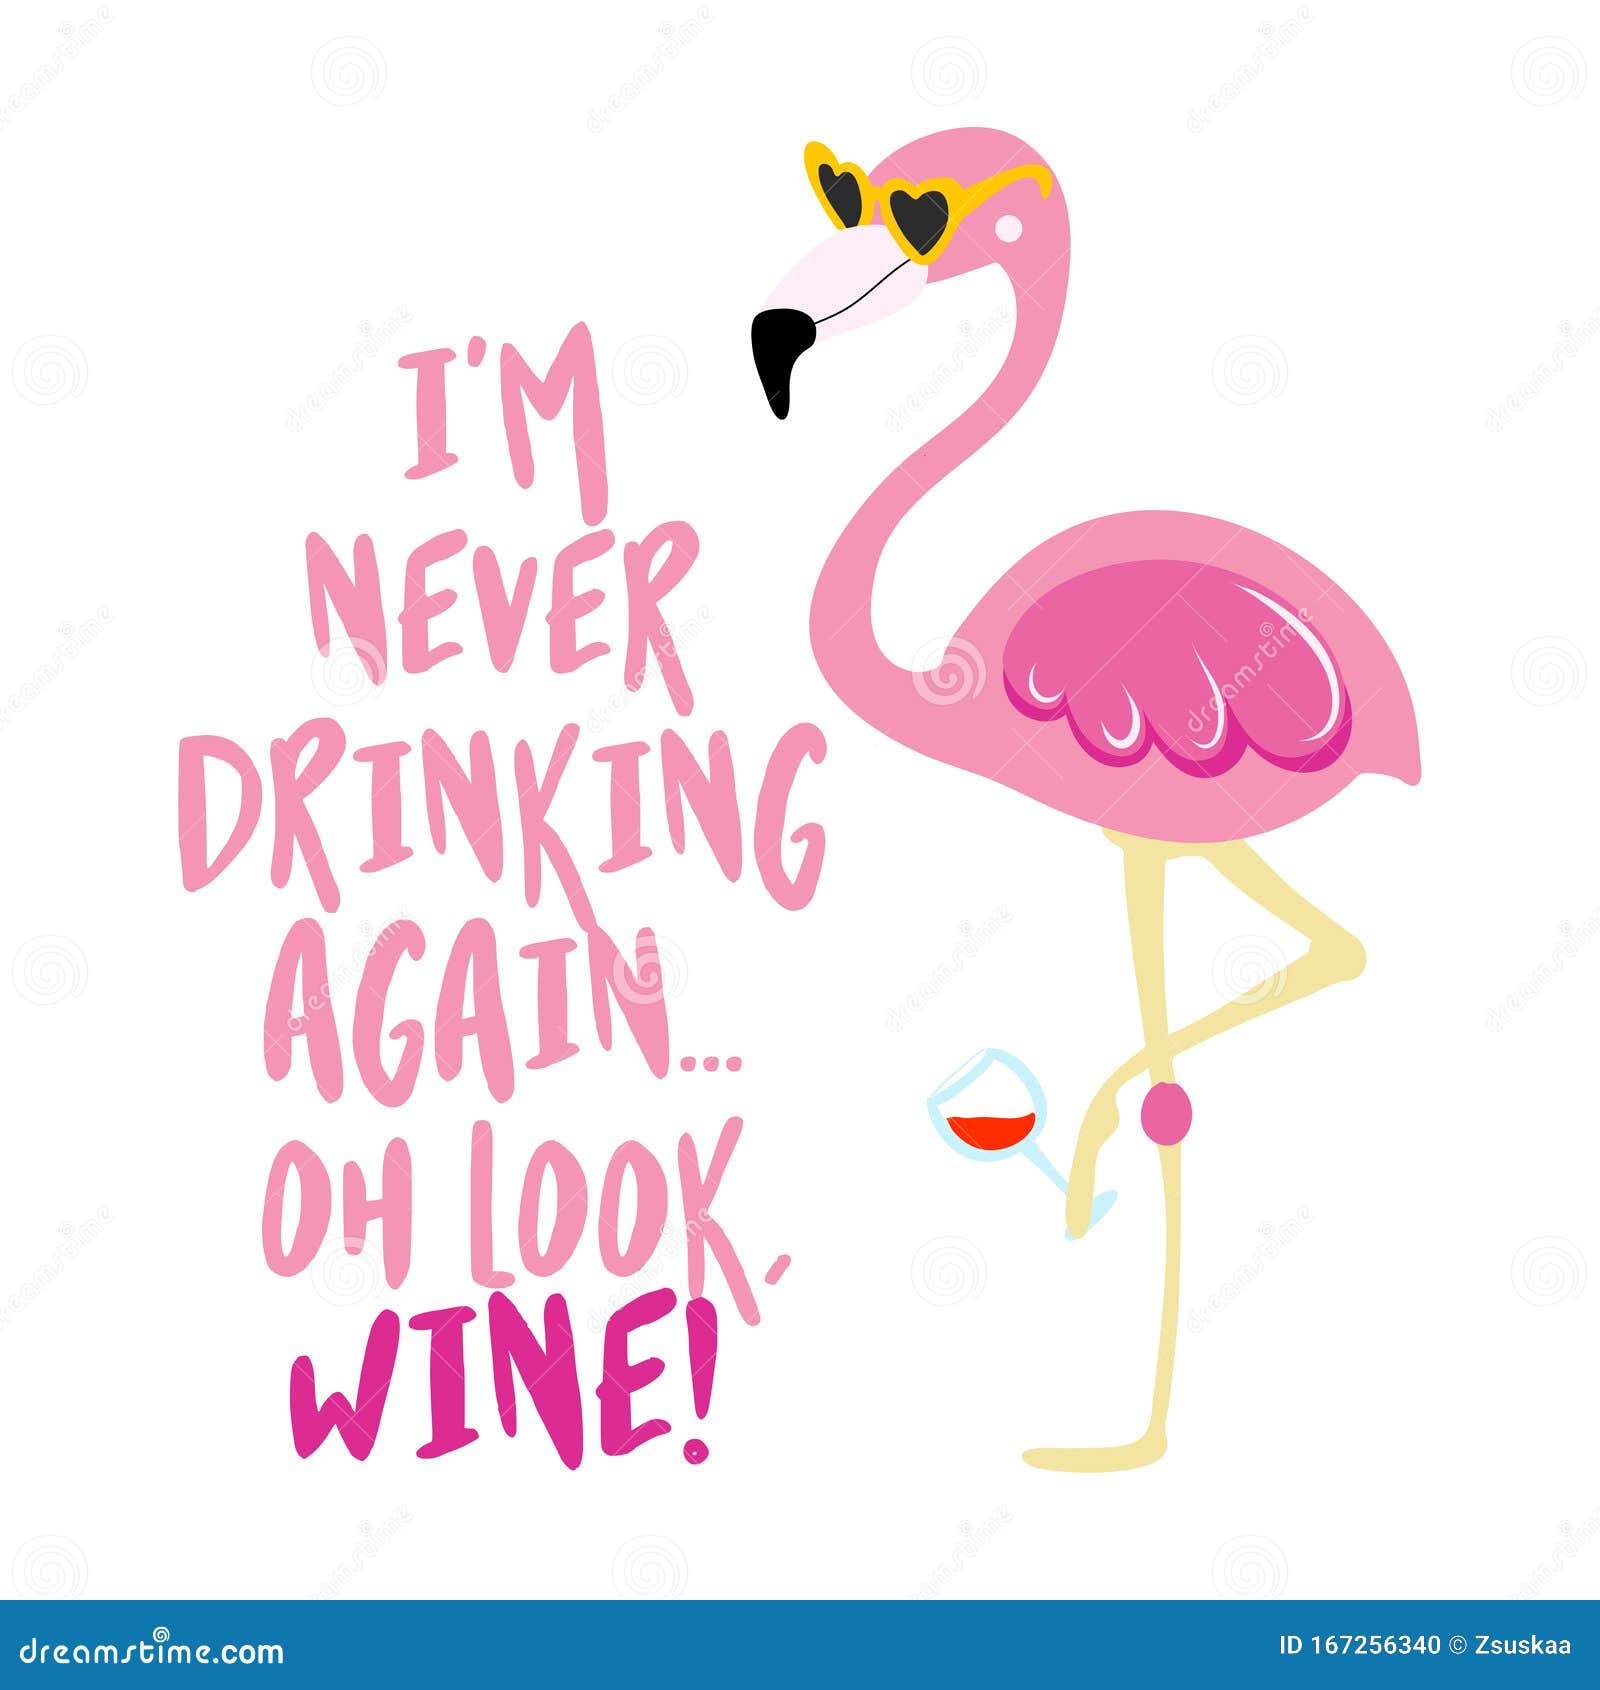 i am never drinking again. oh look, wine!